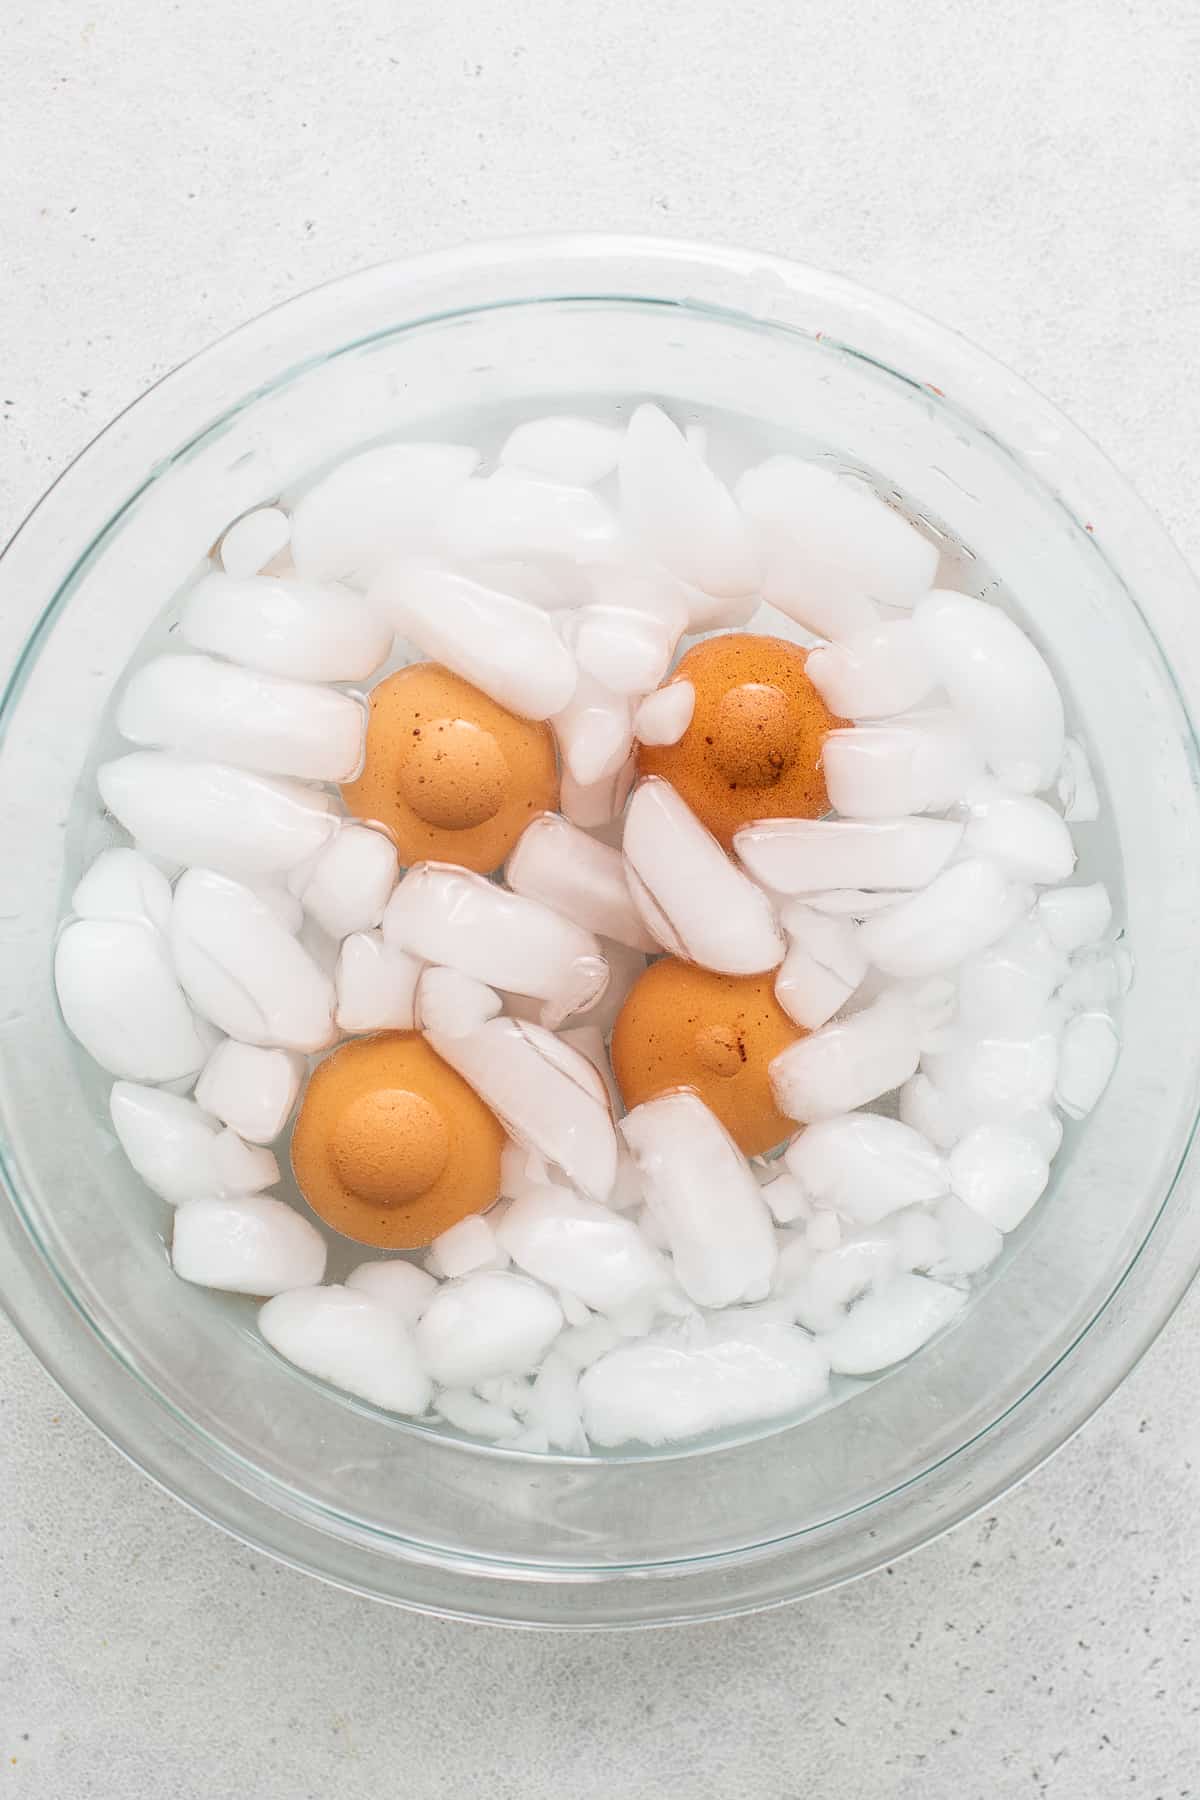 Hard boiled eggs in a bowl of ice water.